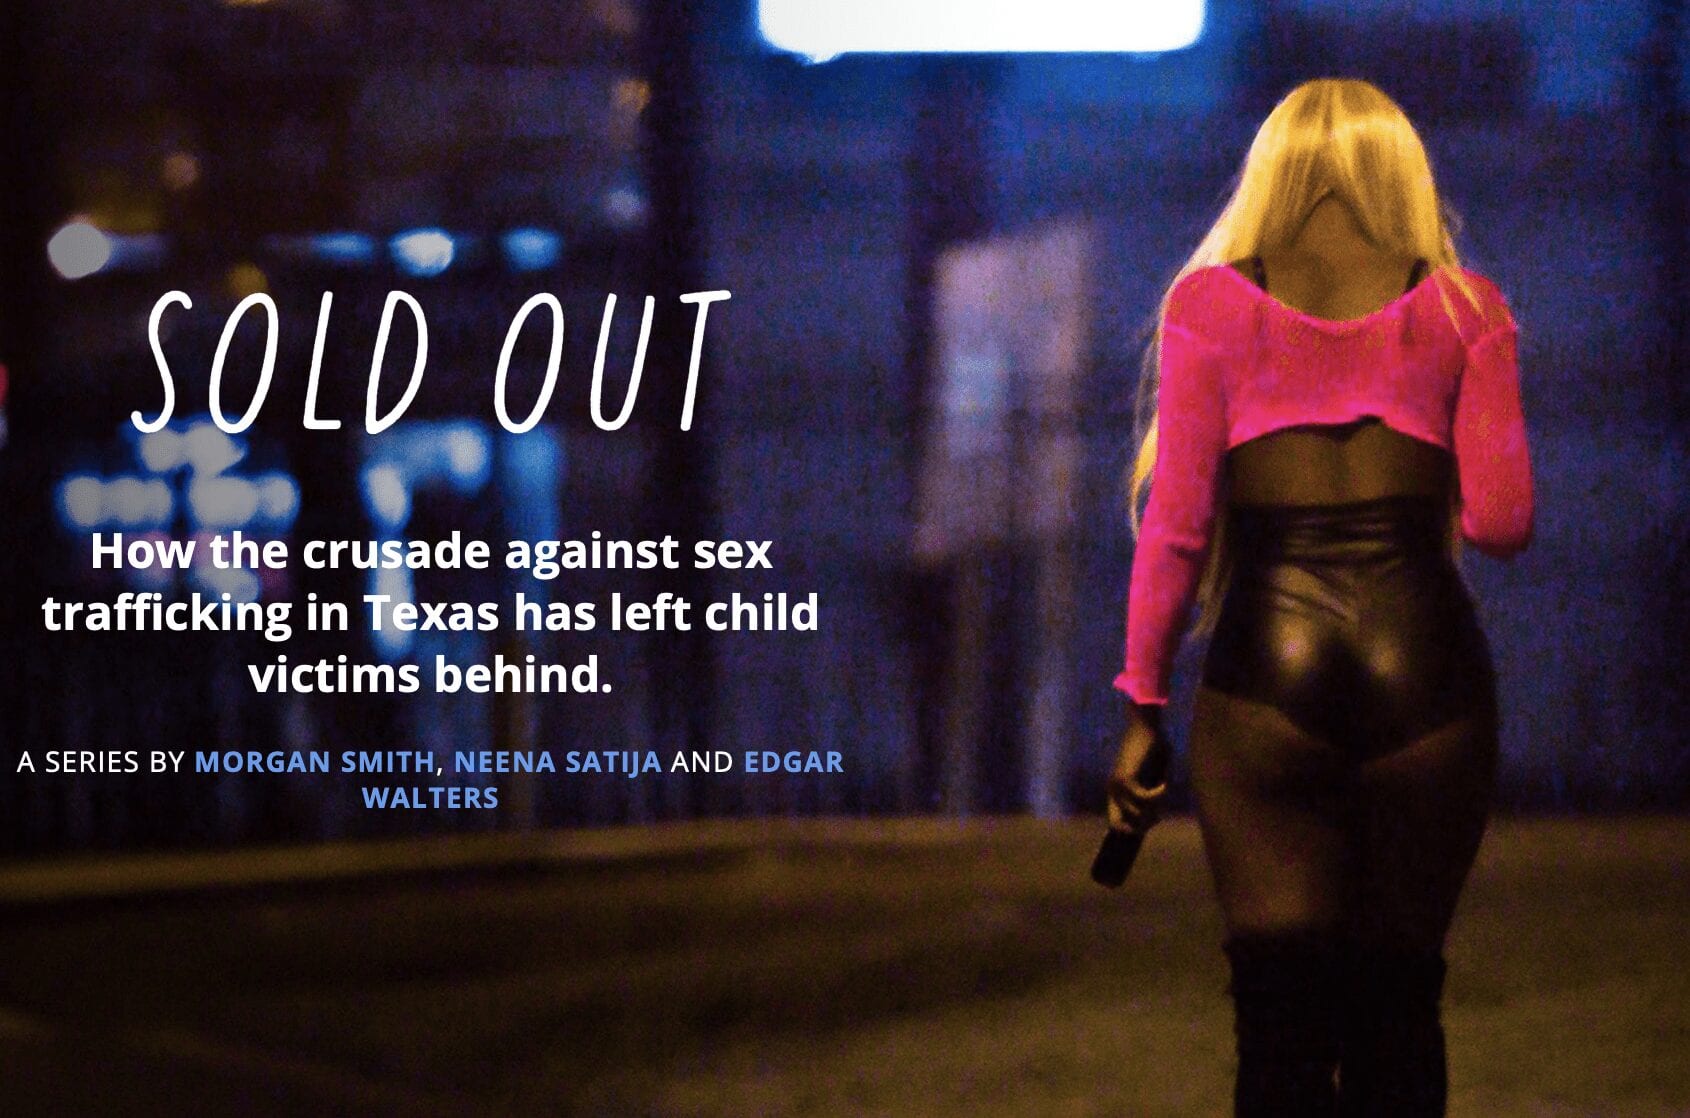 Sold Out: How the crusade against sex trafficking in Texas has left child victims behind.